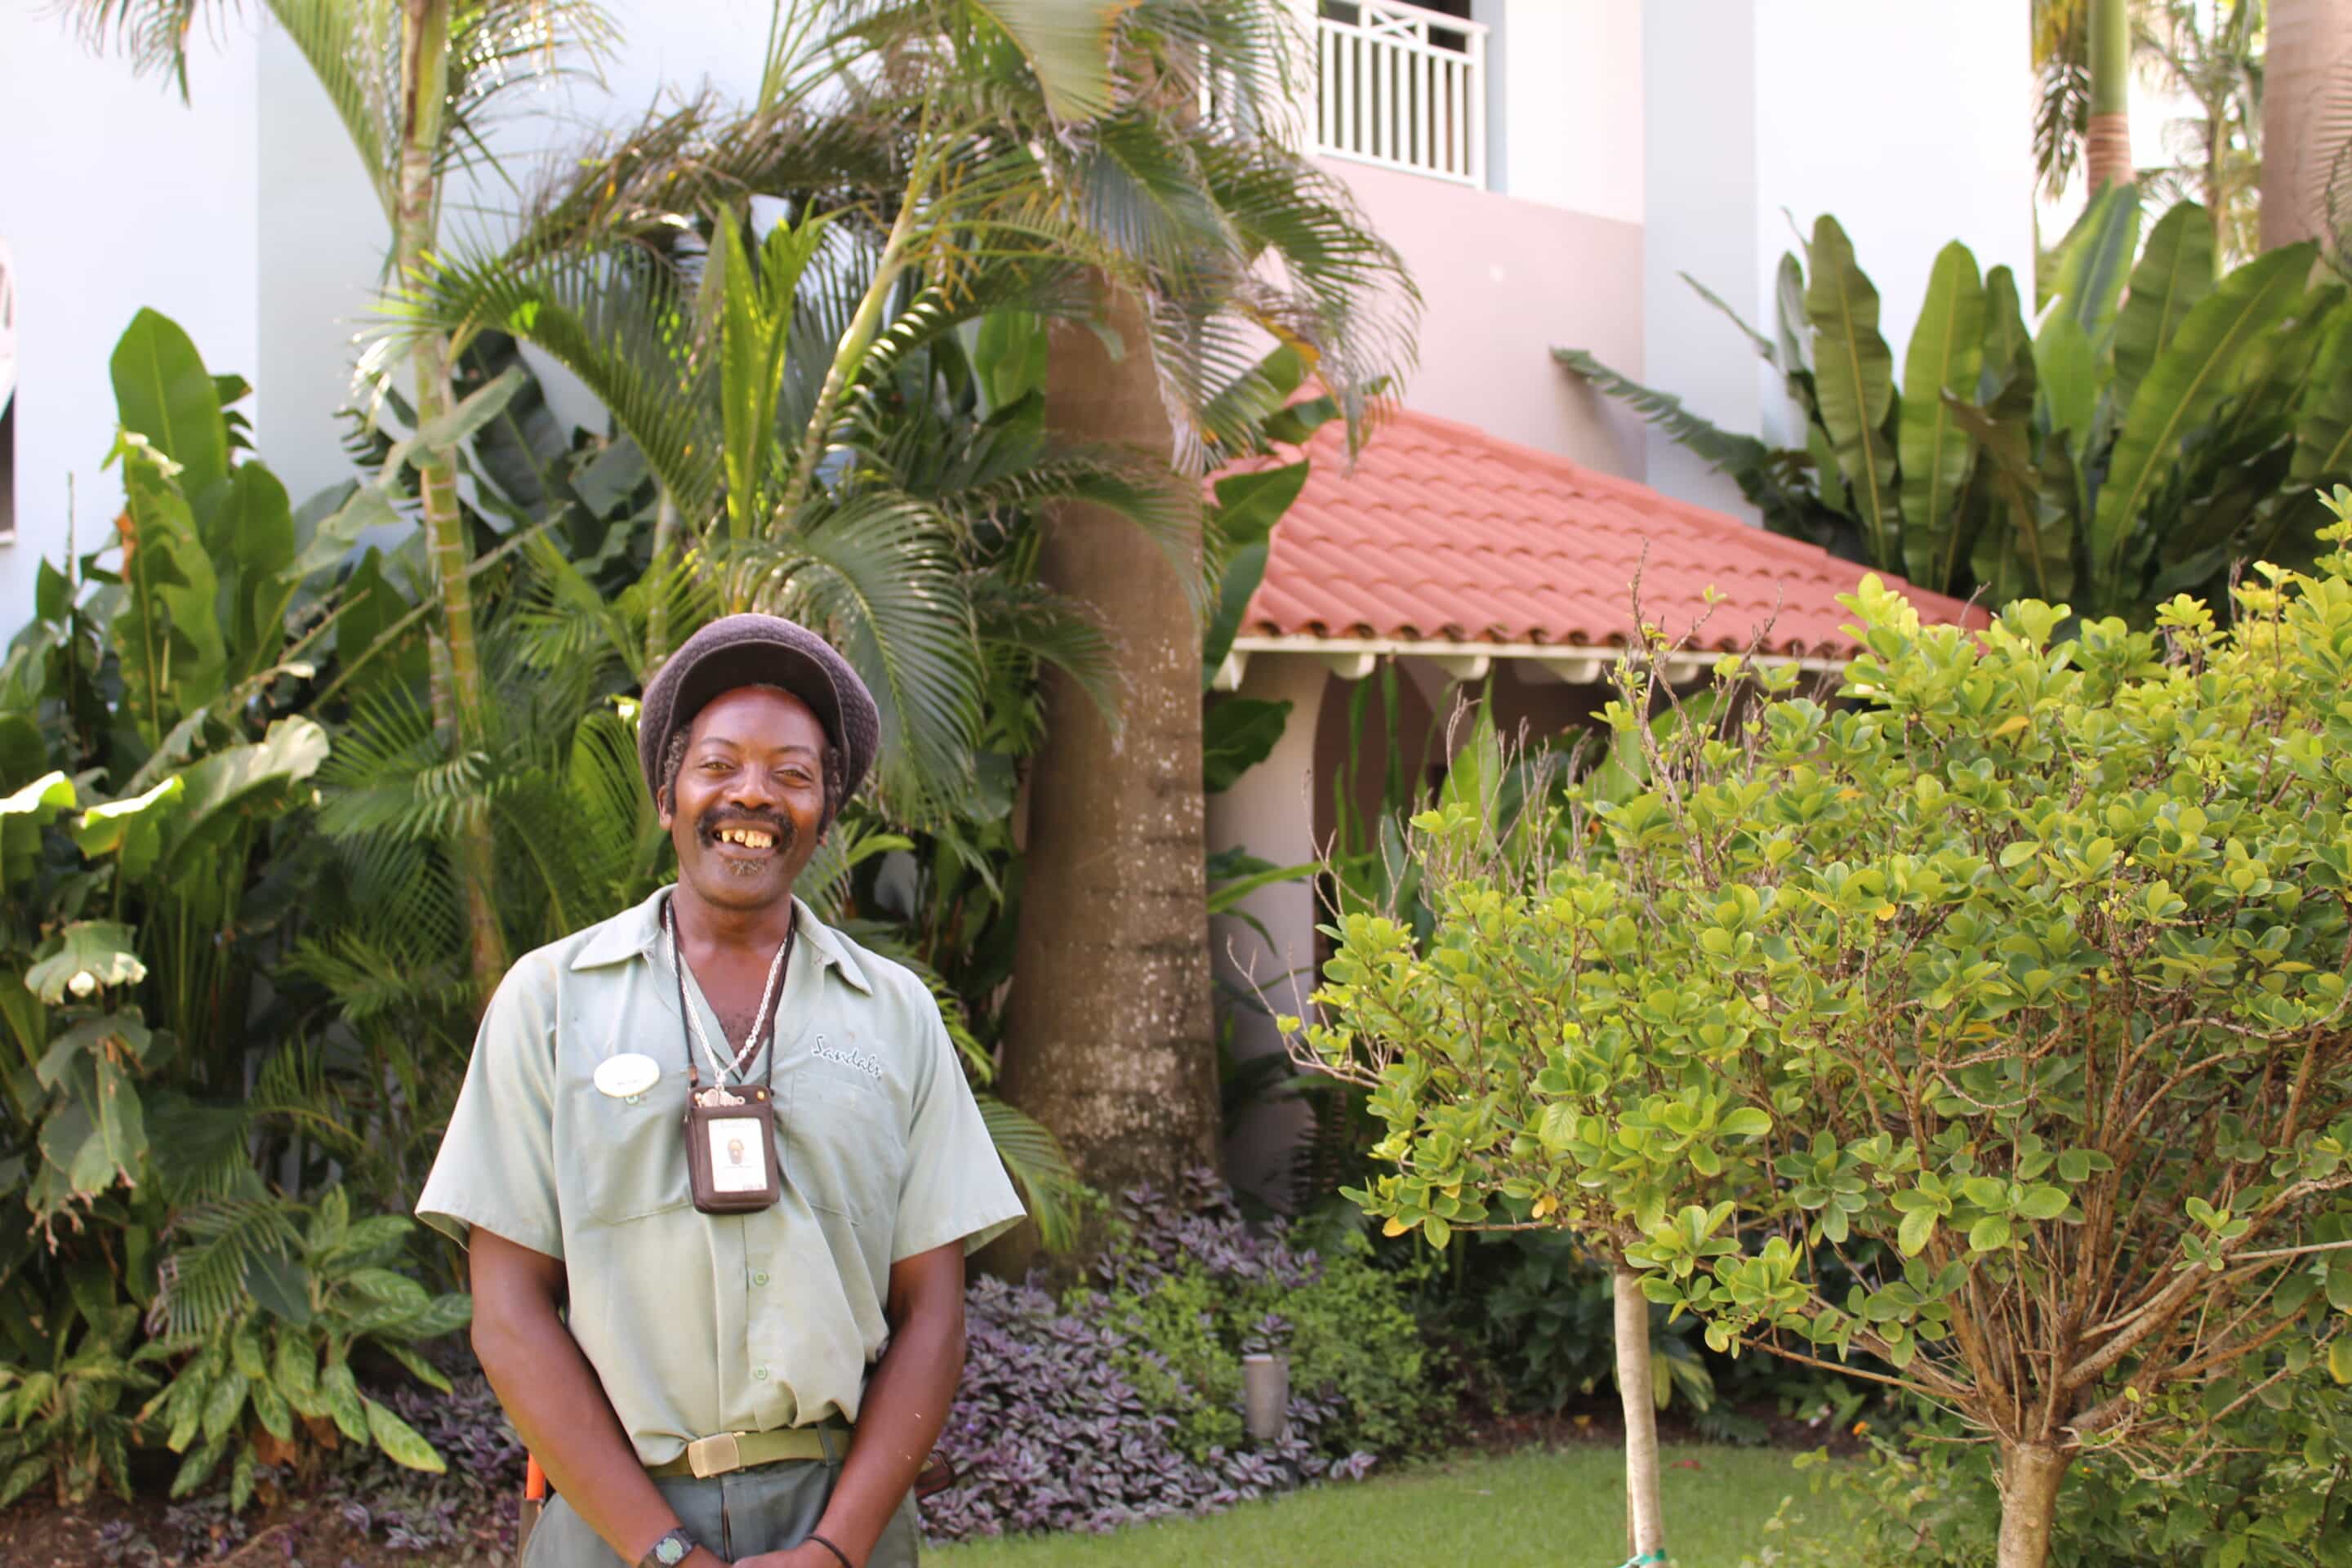 Find Your Bliss at Sandals Barbados: We're greeted by a grinning, singing gardener as we step off the elevator, "I love working outside mon. The plants are my passion," he shares.